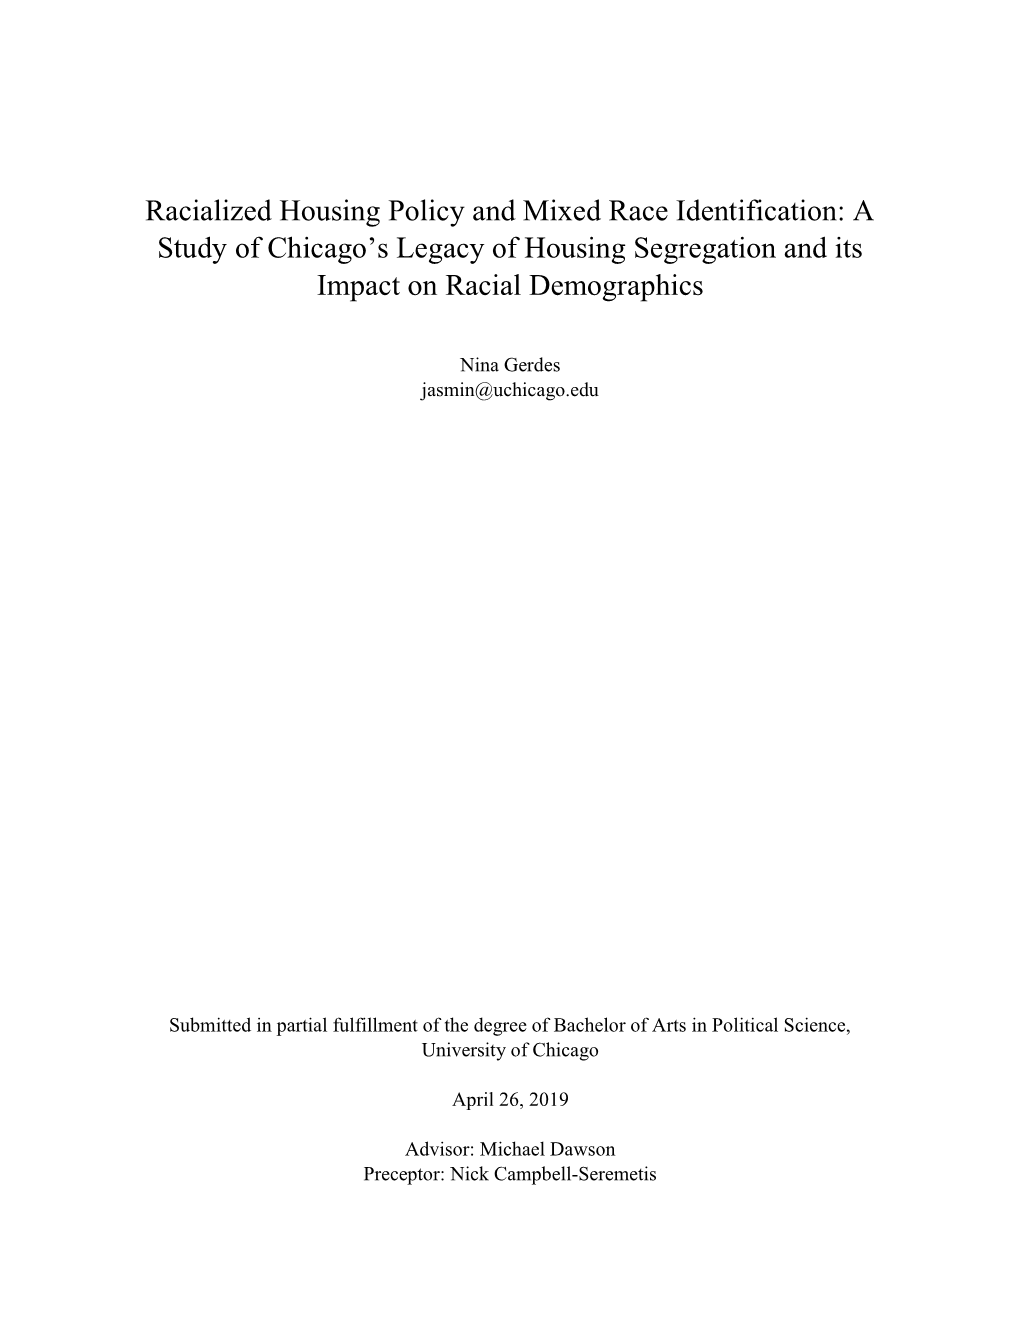 Racialized Housing Policy and Mixed Race Identification: a Study of Chicago’S Legacy of Housing Segregation and Its Impact on Racial Demographics